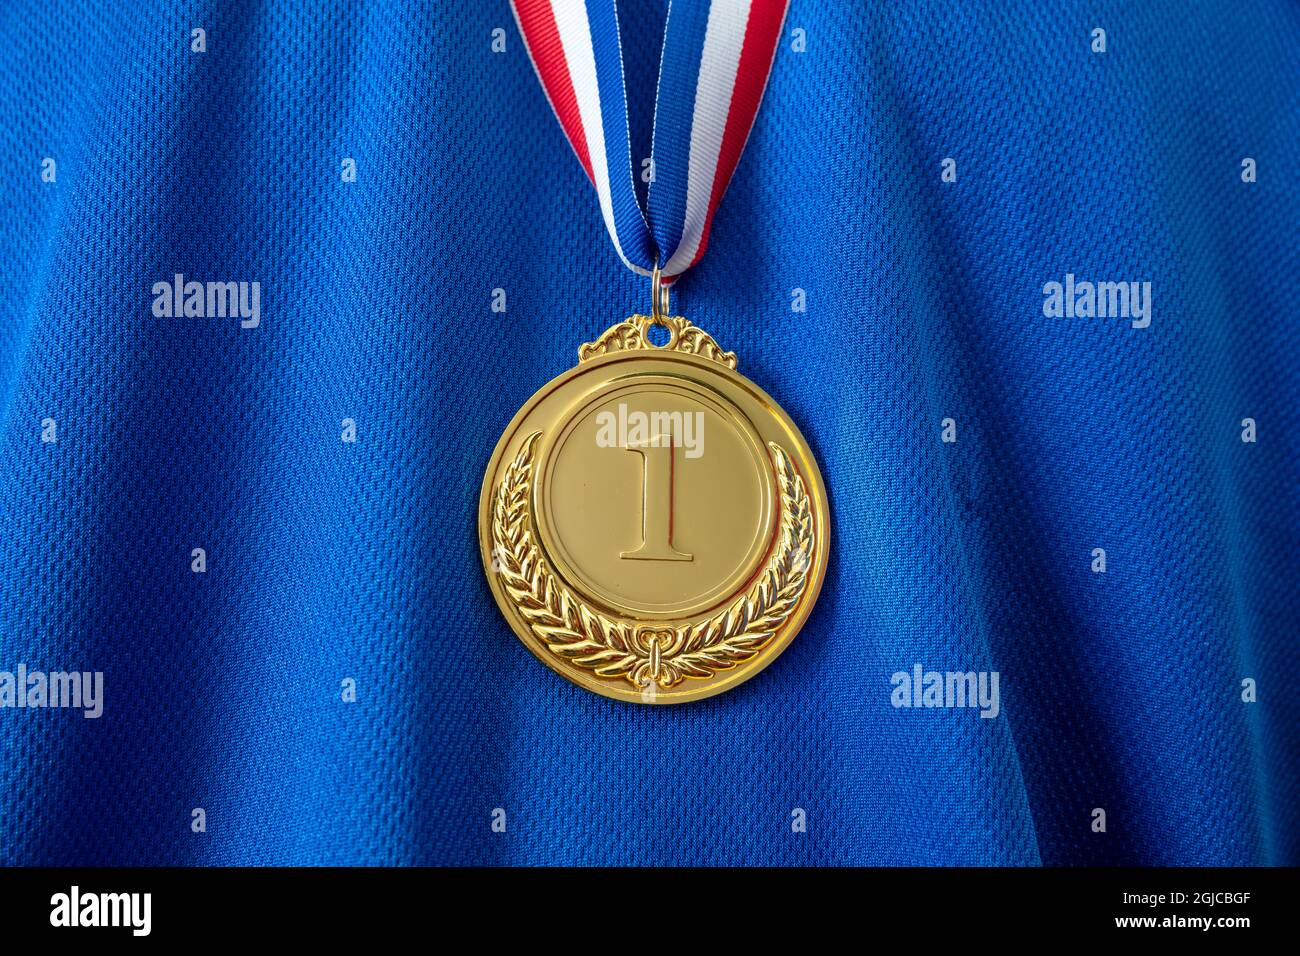 Medal gold, Winner prize award hanging with red blue color ribbon on athlete chest. Golden trophy in sport for first place champion on blue color shir Stock Photo